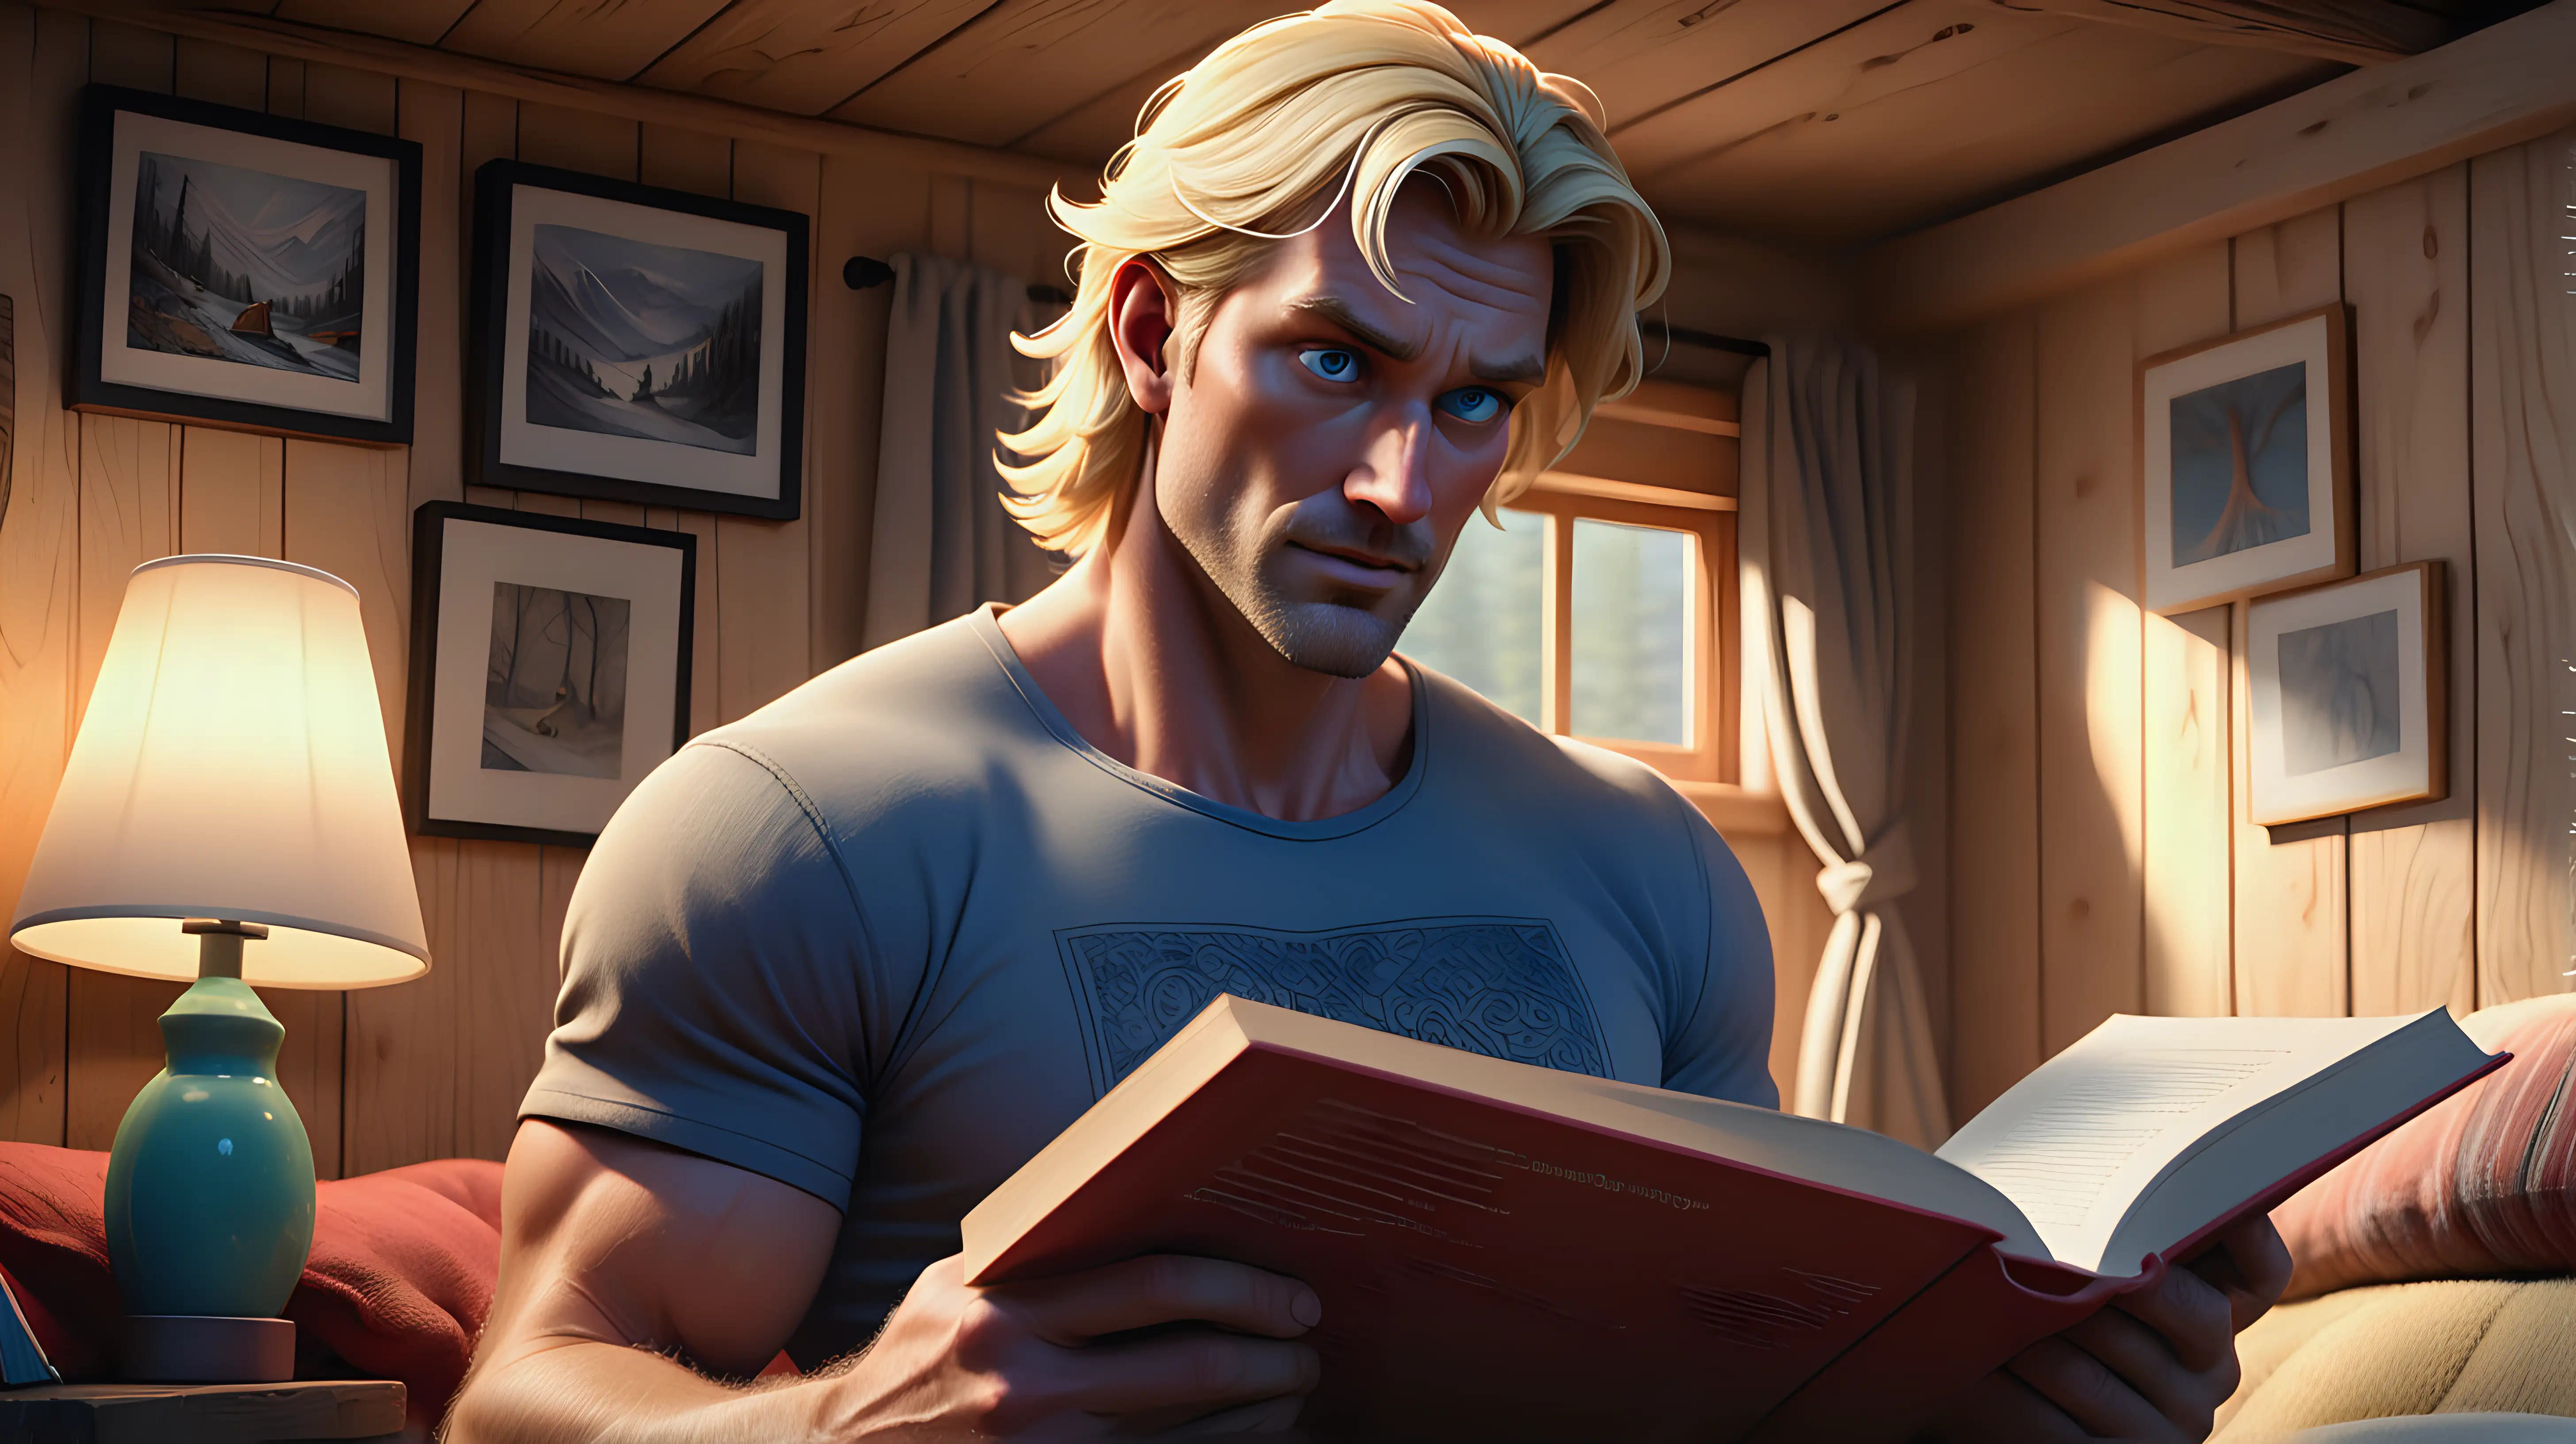 Blonde Man Jack Relaxing in Cozy Cabin Reading Book